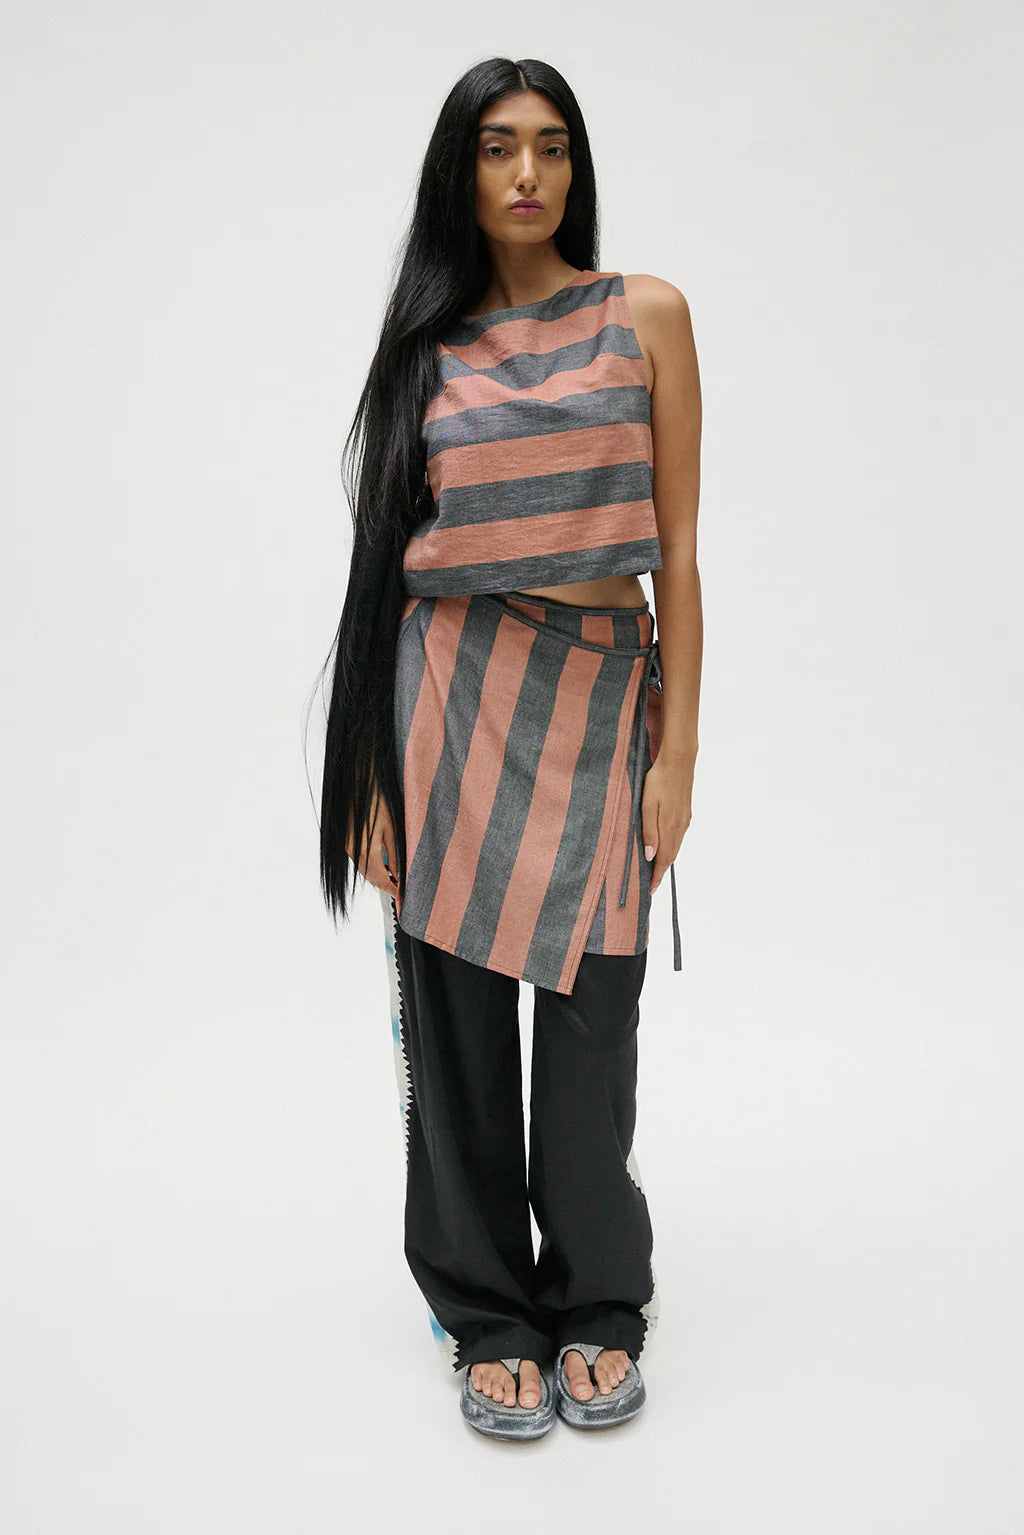 Muse The Label - Melt Wrap Skirt - Brown Stripe